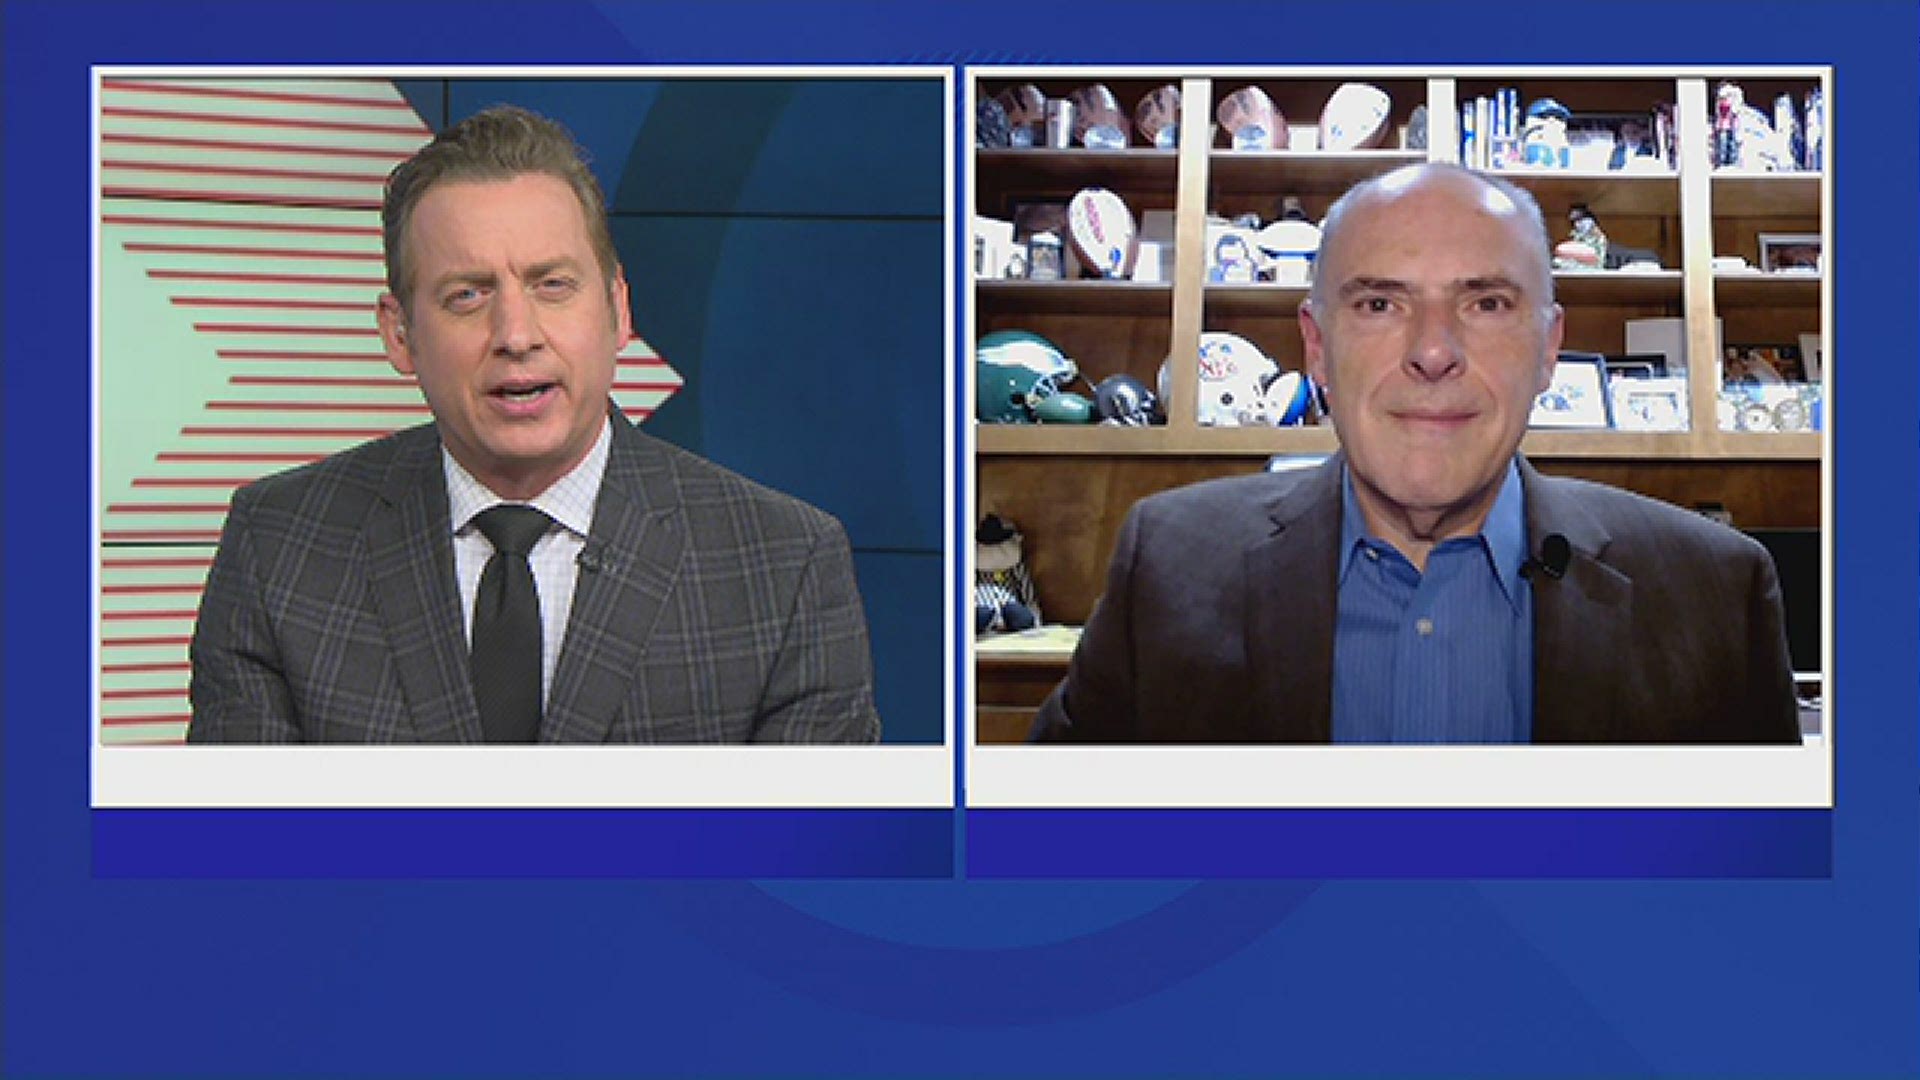 WGRZ's Adam Benigni is joined by Vic Carucci of the Buffalo News and Sports Talk Live to break down the Bills 18-10 win over the Jets.